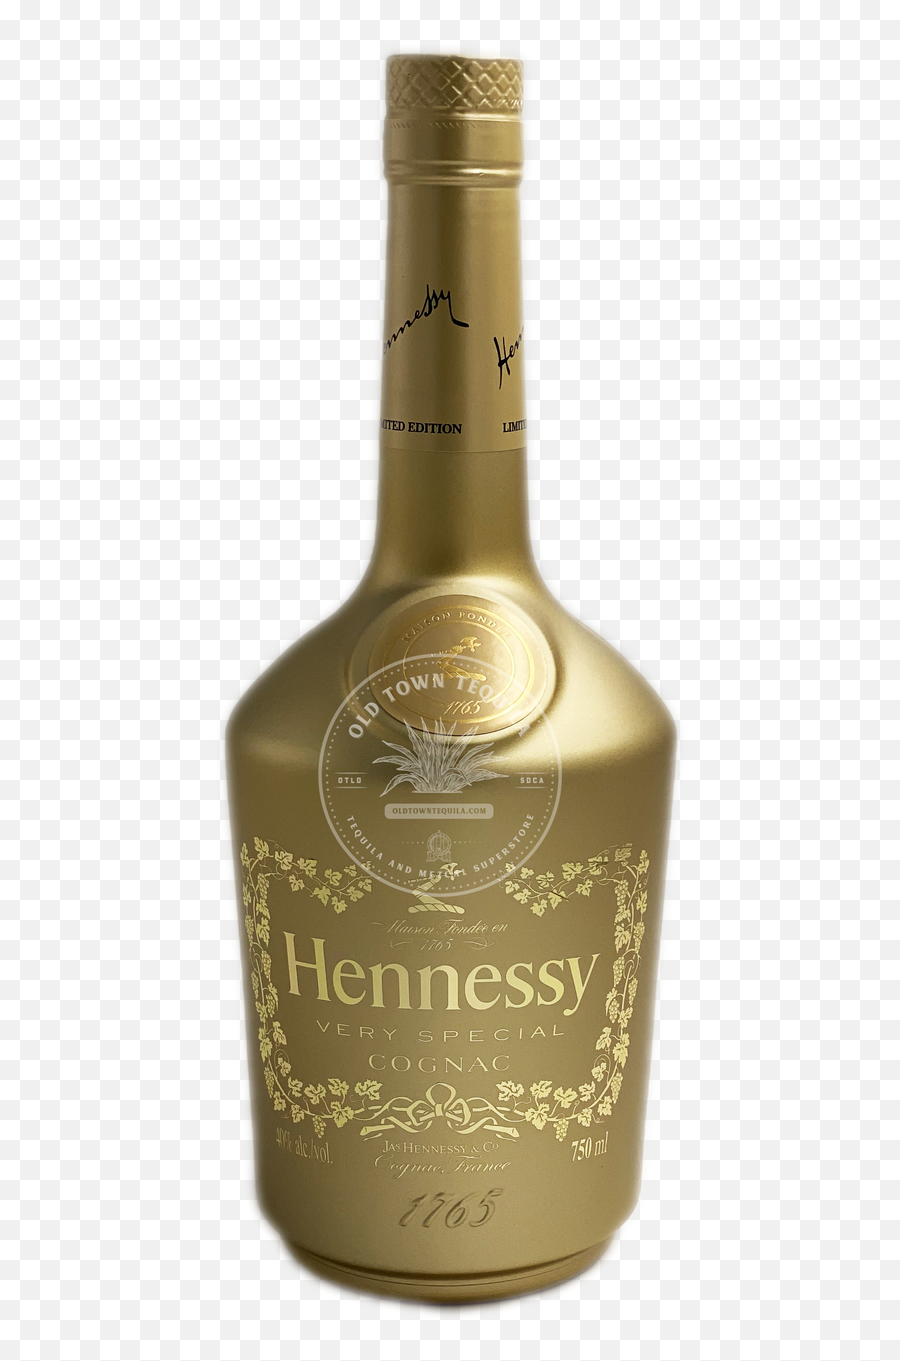 Hennessy Limited Edition Very Special Cognac 750ml - Old Glass Bottle Emoji,Hennessy Bottle Png